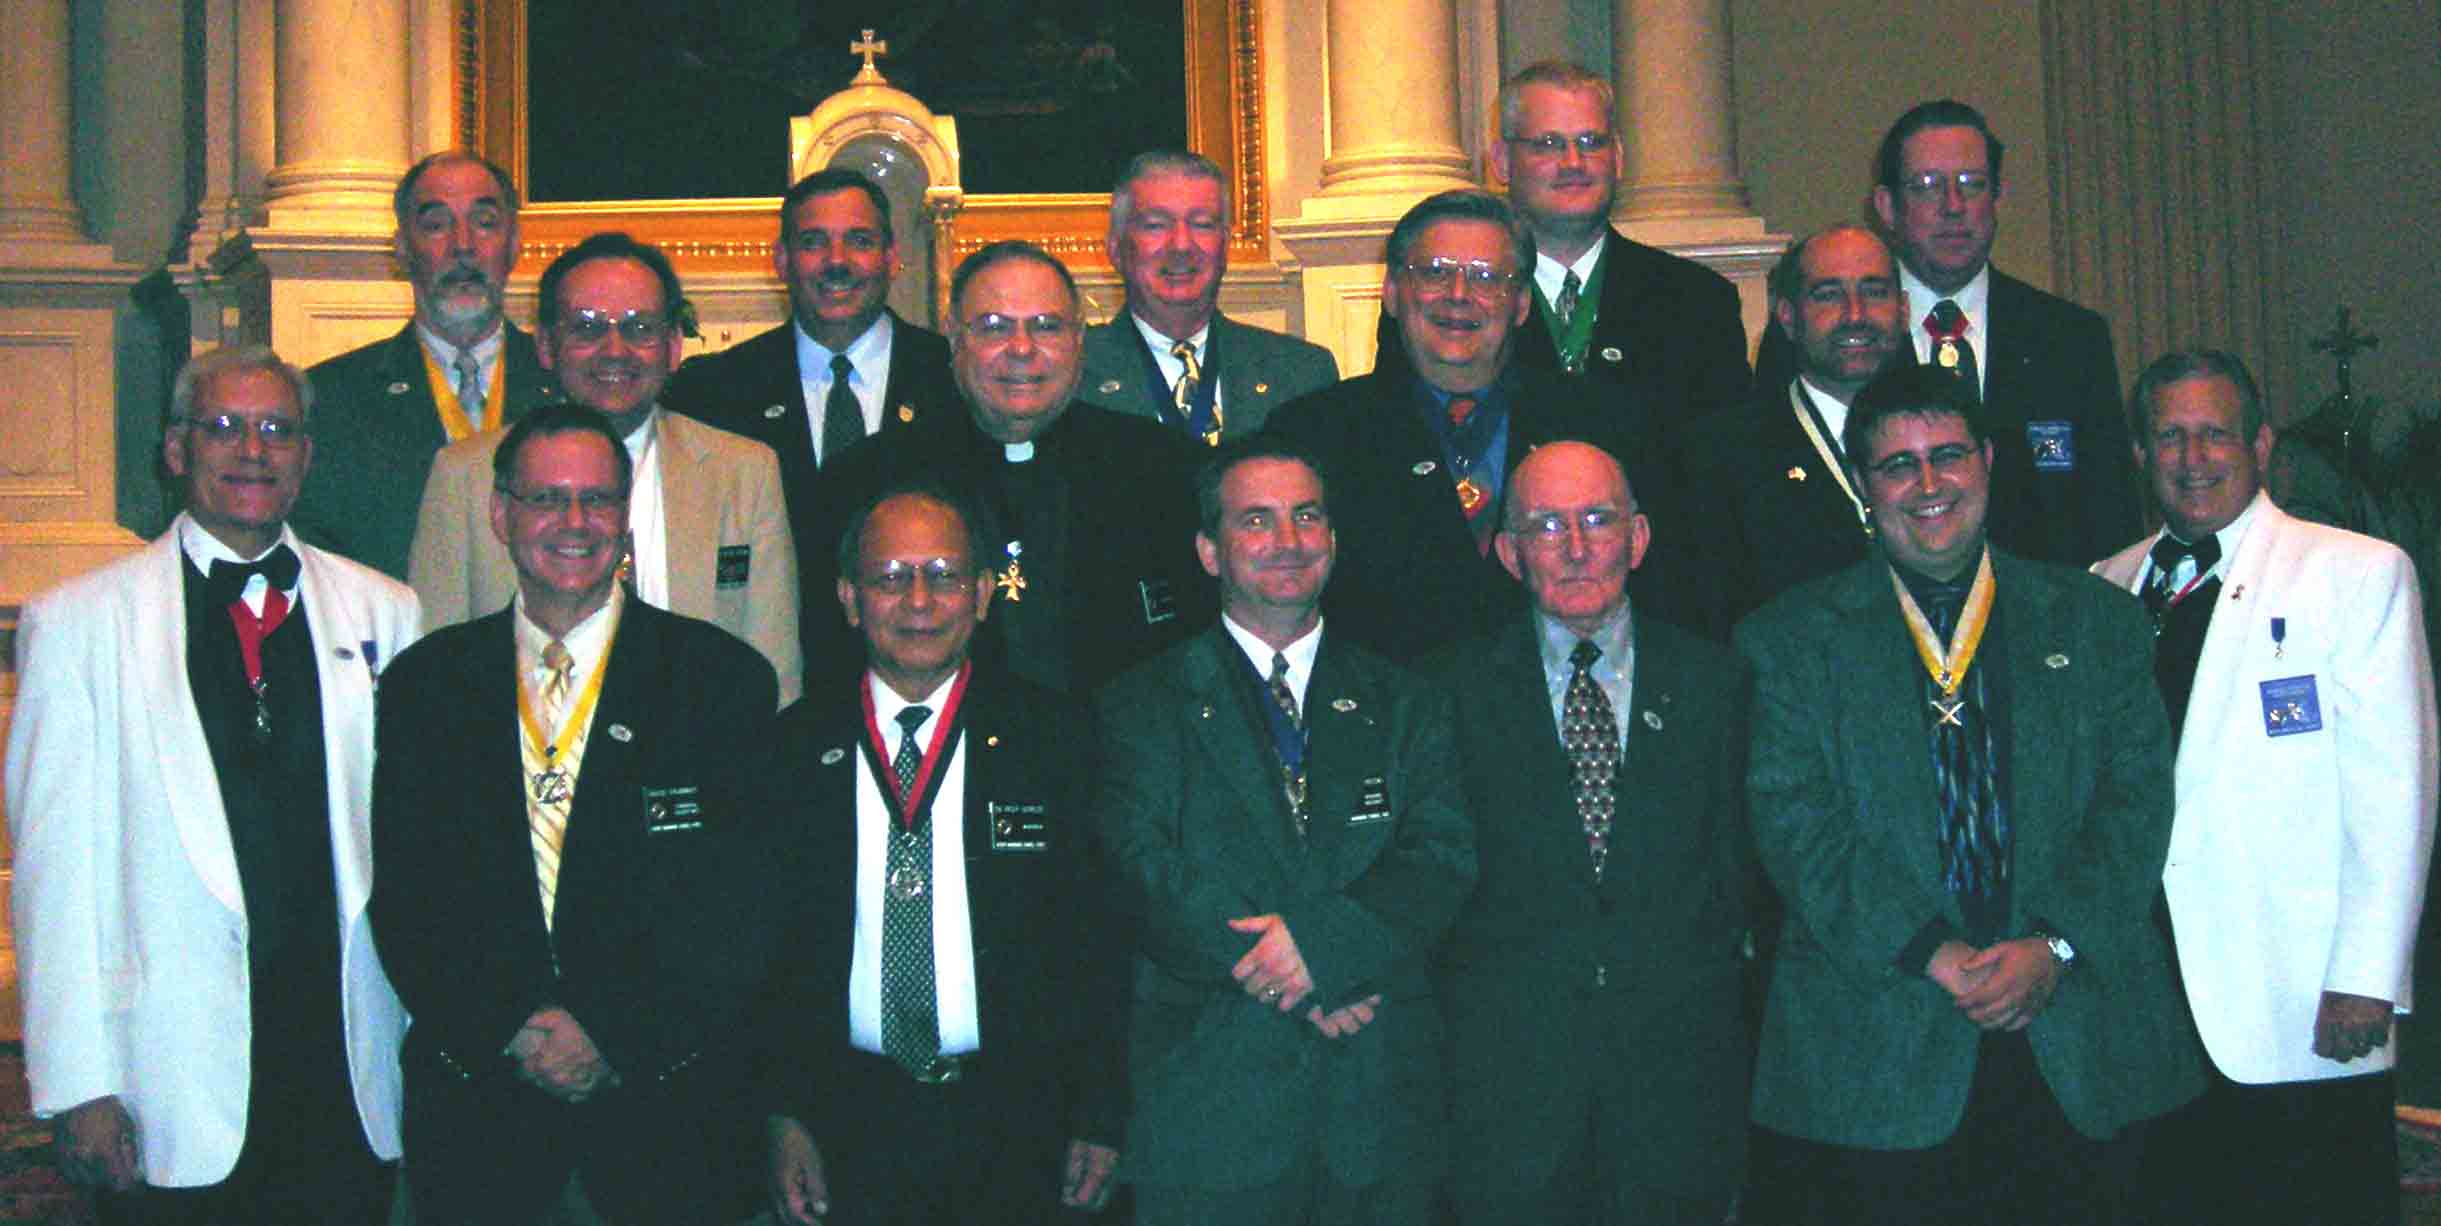 KofC Cncl 1622 Officers 2006-2007 Fraternal Year – Double click for close up